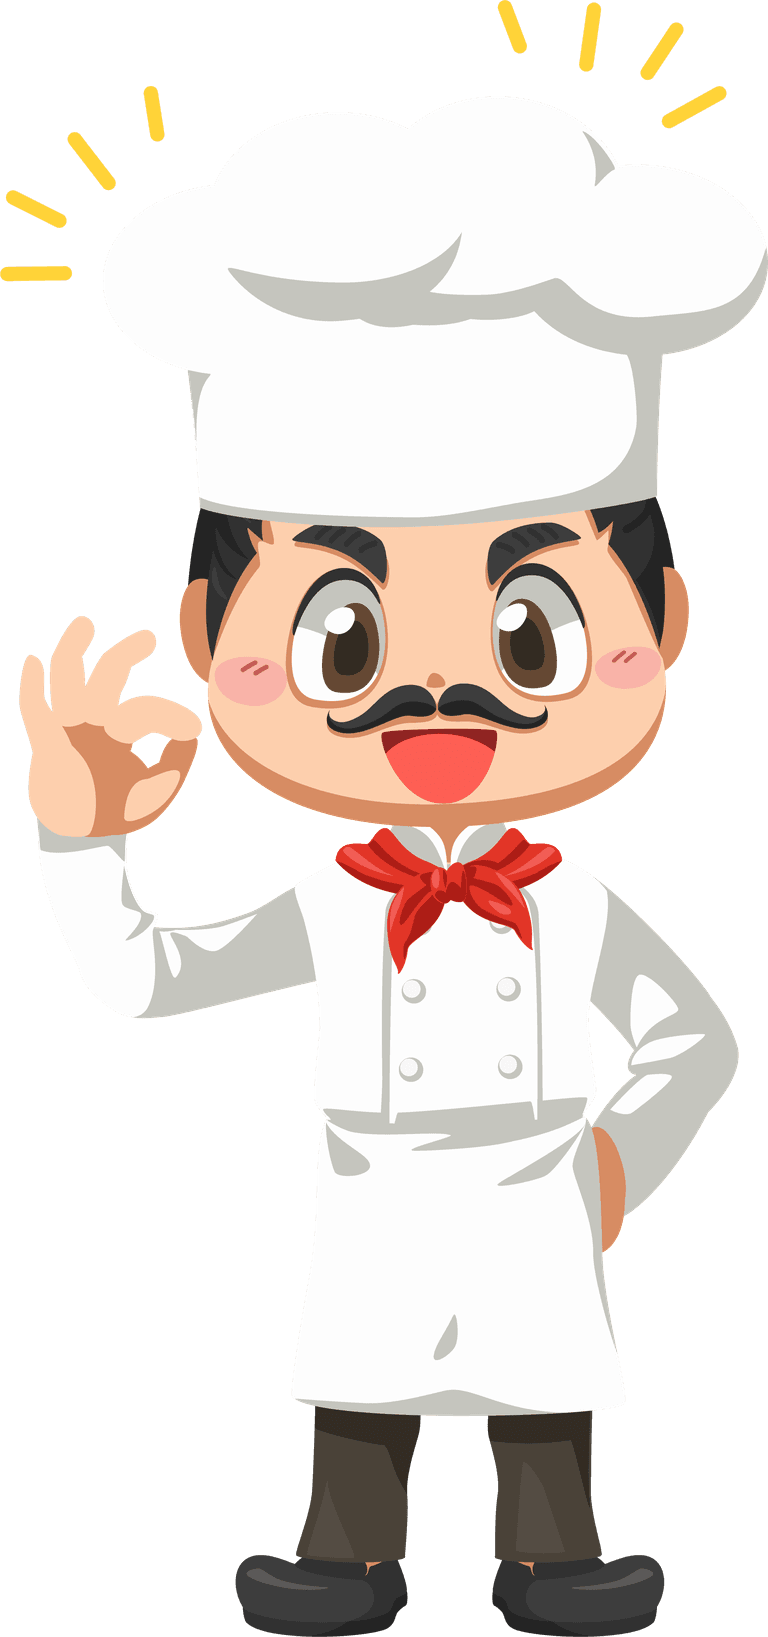 pastry chef making bakery cartoon character mascot illustration culinary business